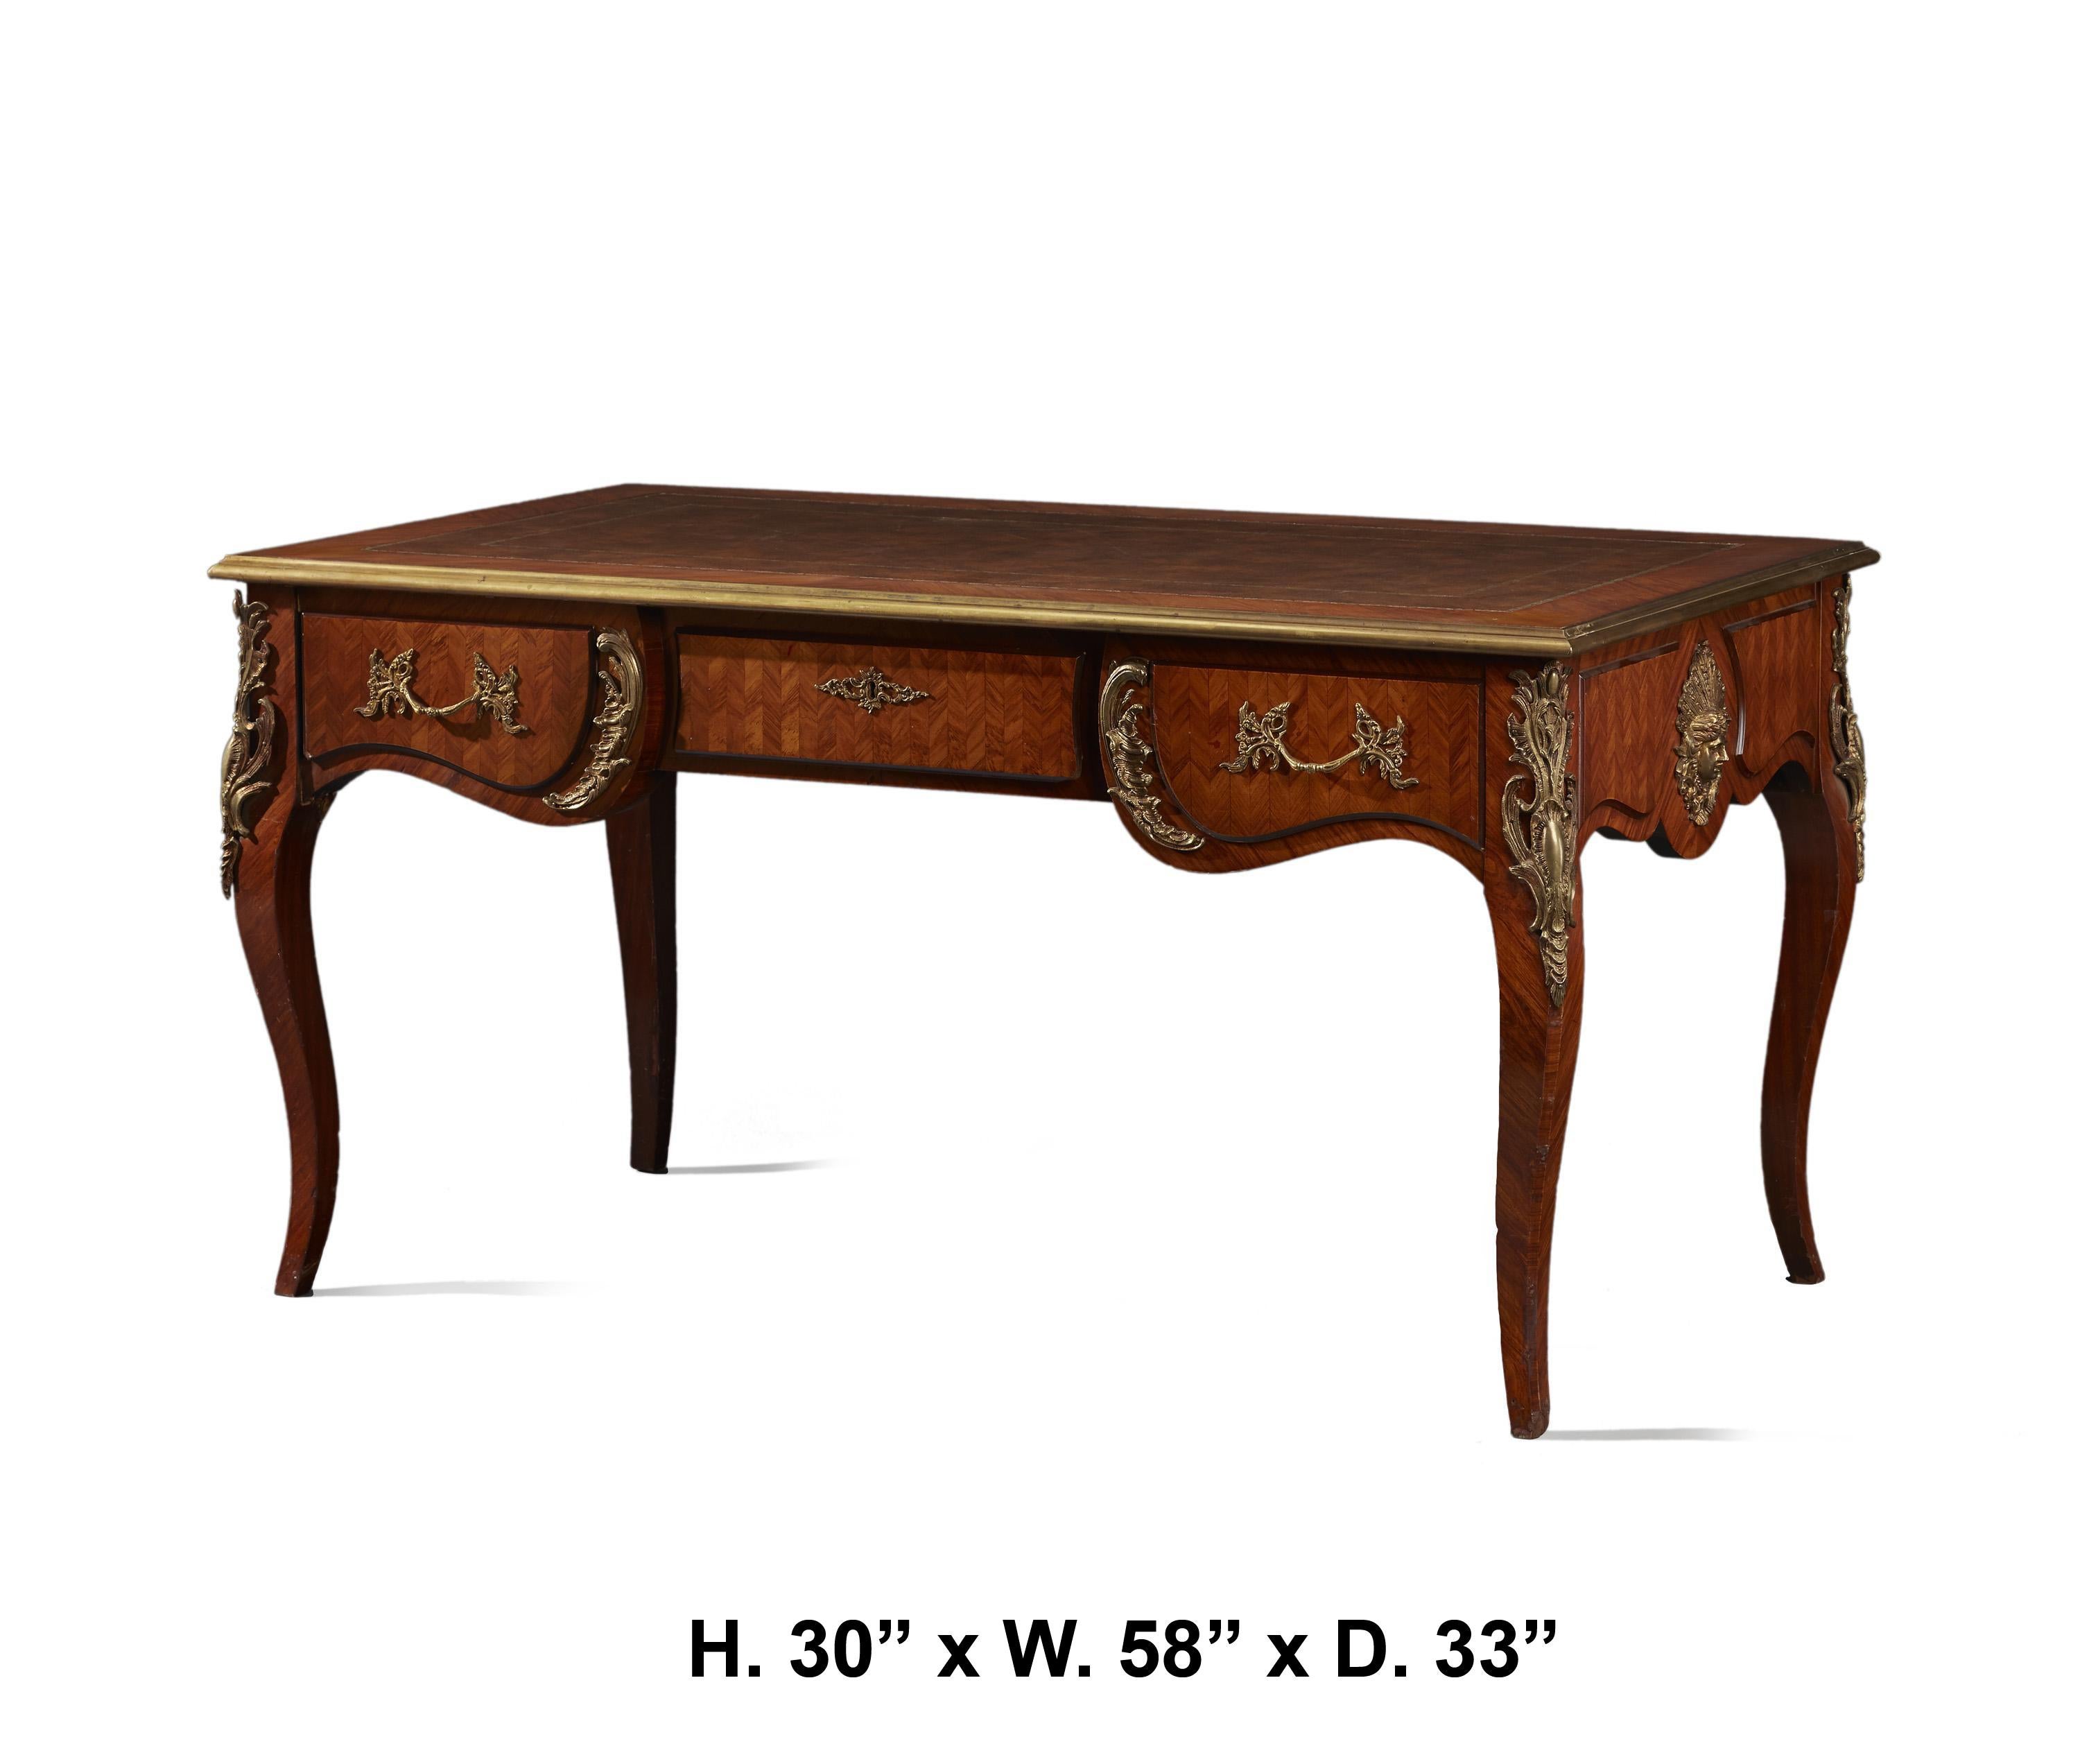 A beautiful French Louis XV style bureau plat desk.
Mid-20th century.
The tooled red leather-inlaid top is bordered with brass, above a parquetry veneered frieze fitted with three drawers, the side drawers are mounted with ormolu foliate-inspired